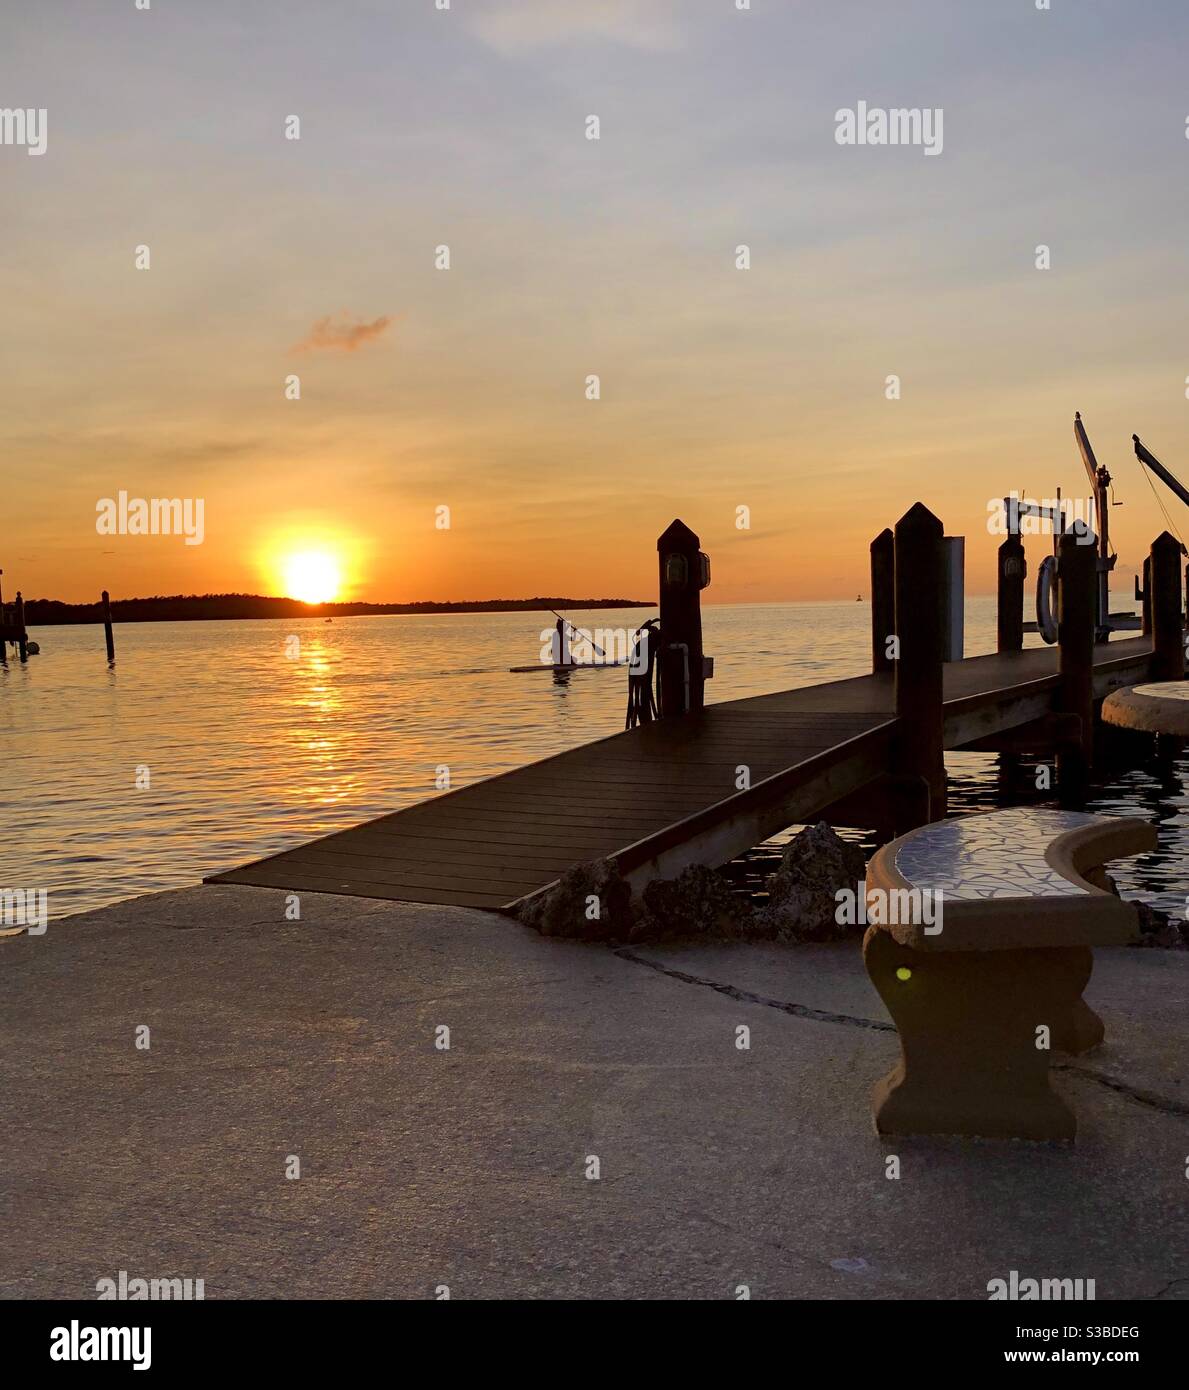 Sun setting on the Bay along a dock with a person heading out on a paddle boat, Key Largo, Florida. Stock Photo